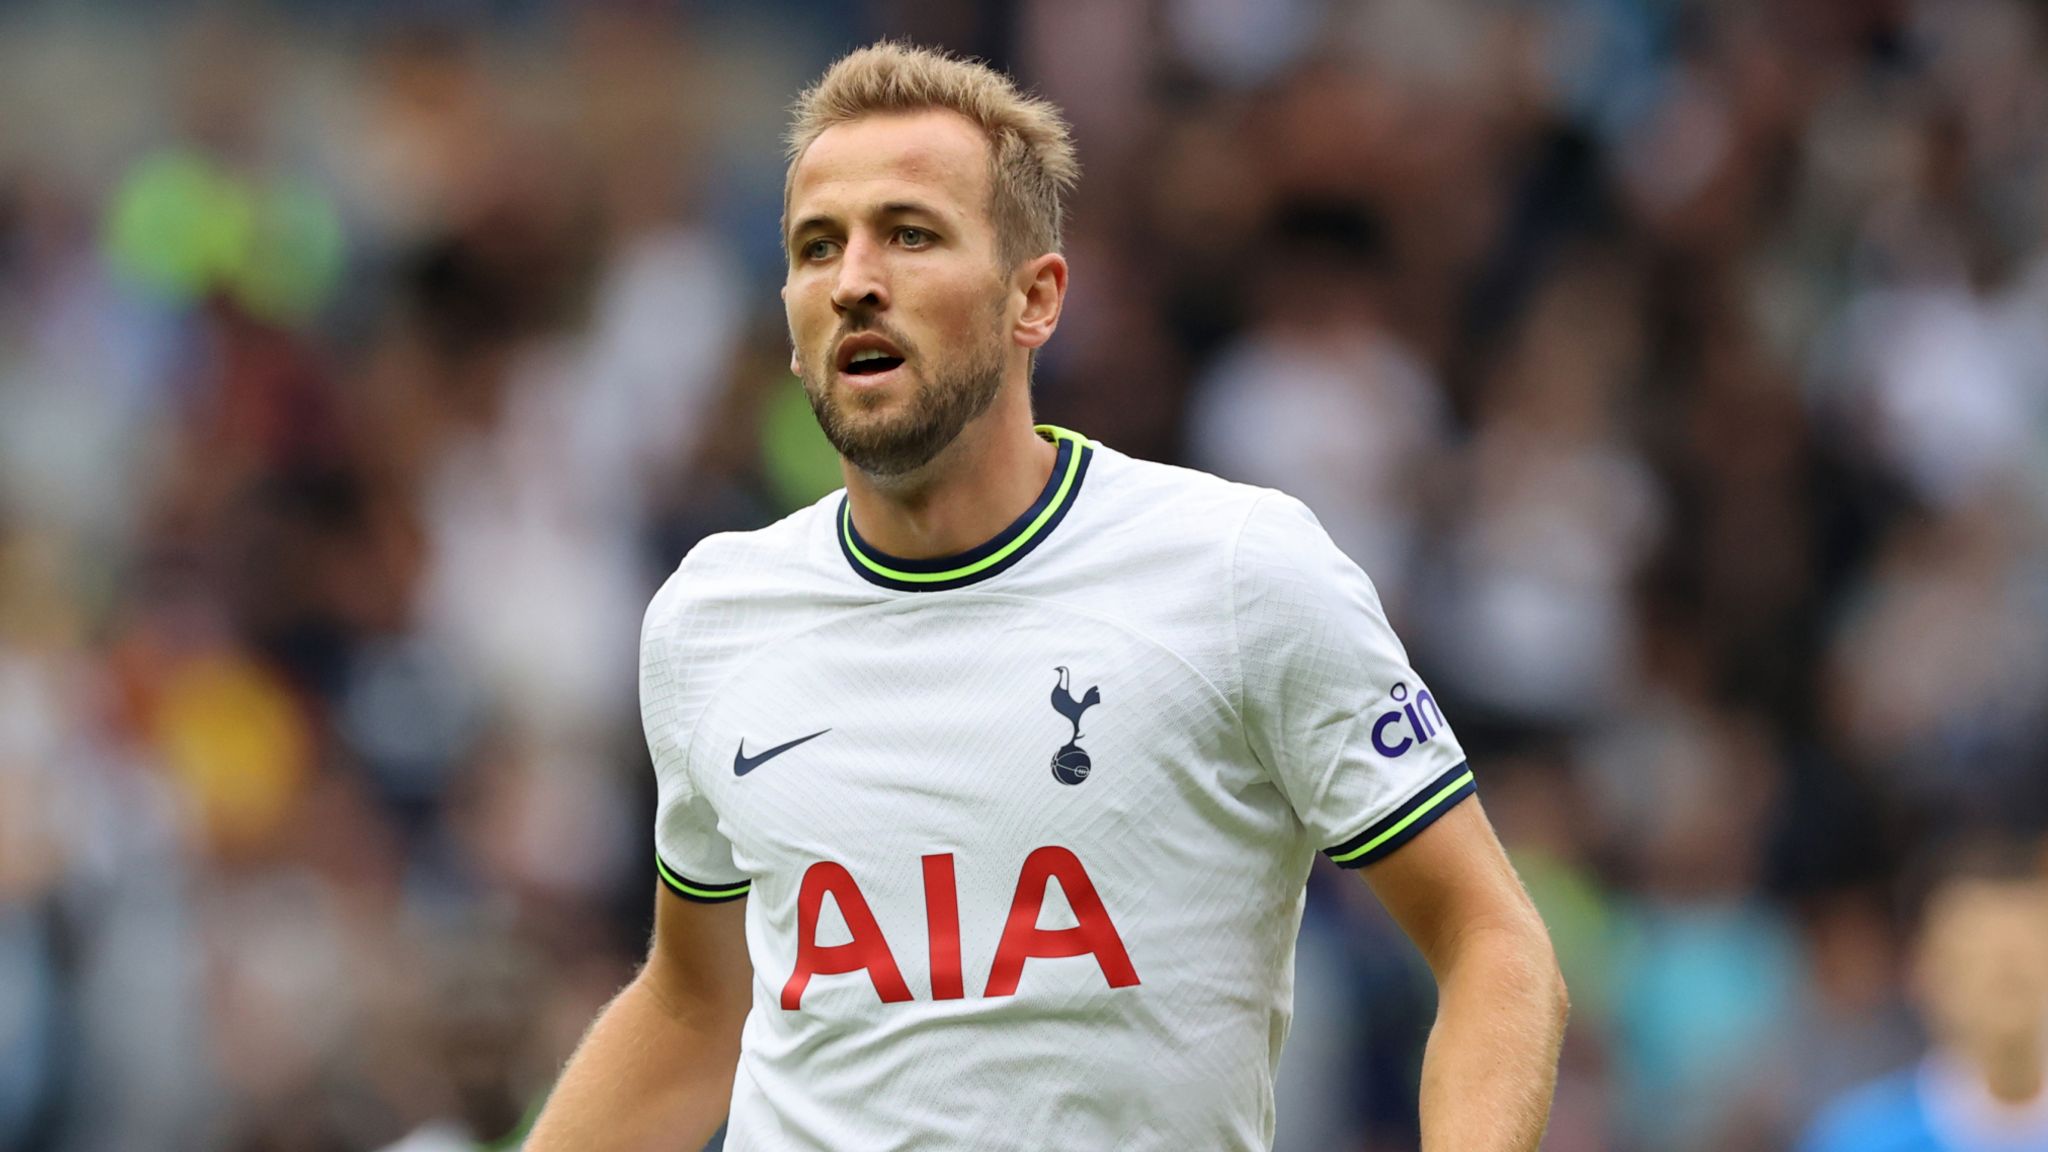 Jamie Redknapp tips Tottenham striker Harry Kane to sign new contract within months to end speculation over future | Football News | Sky Sports